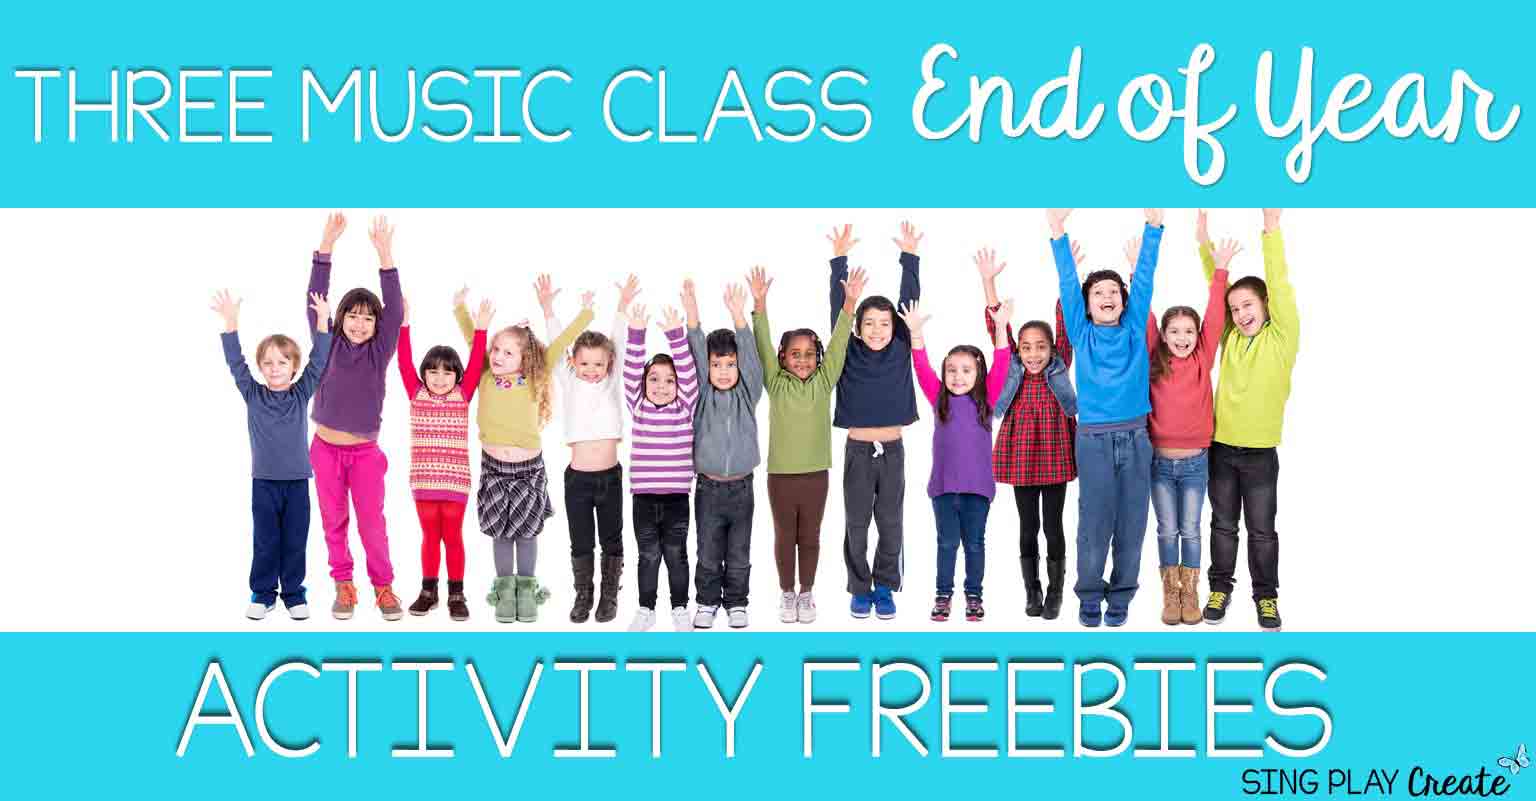 You are currently viewing Three Music Class End of Year Activities